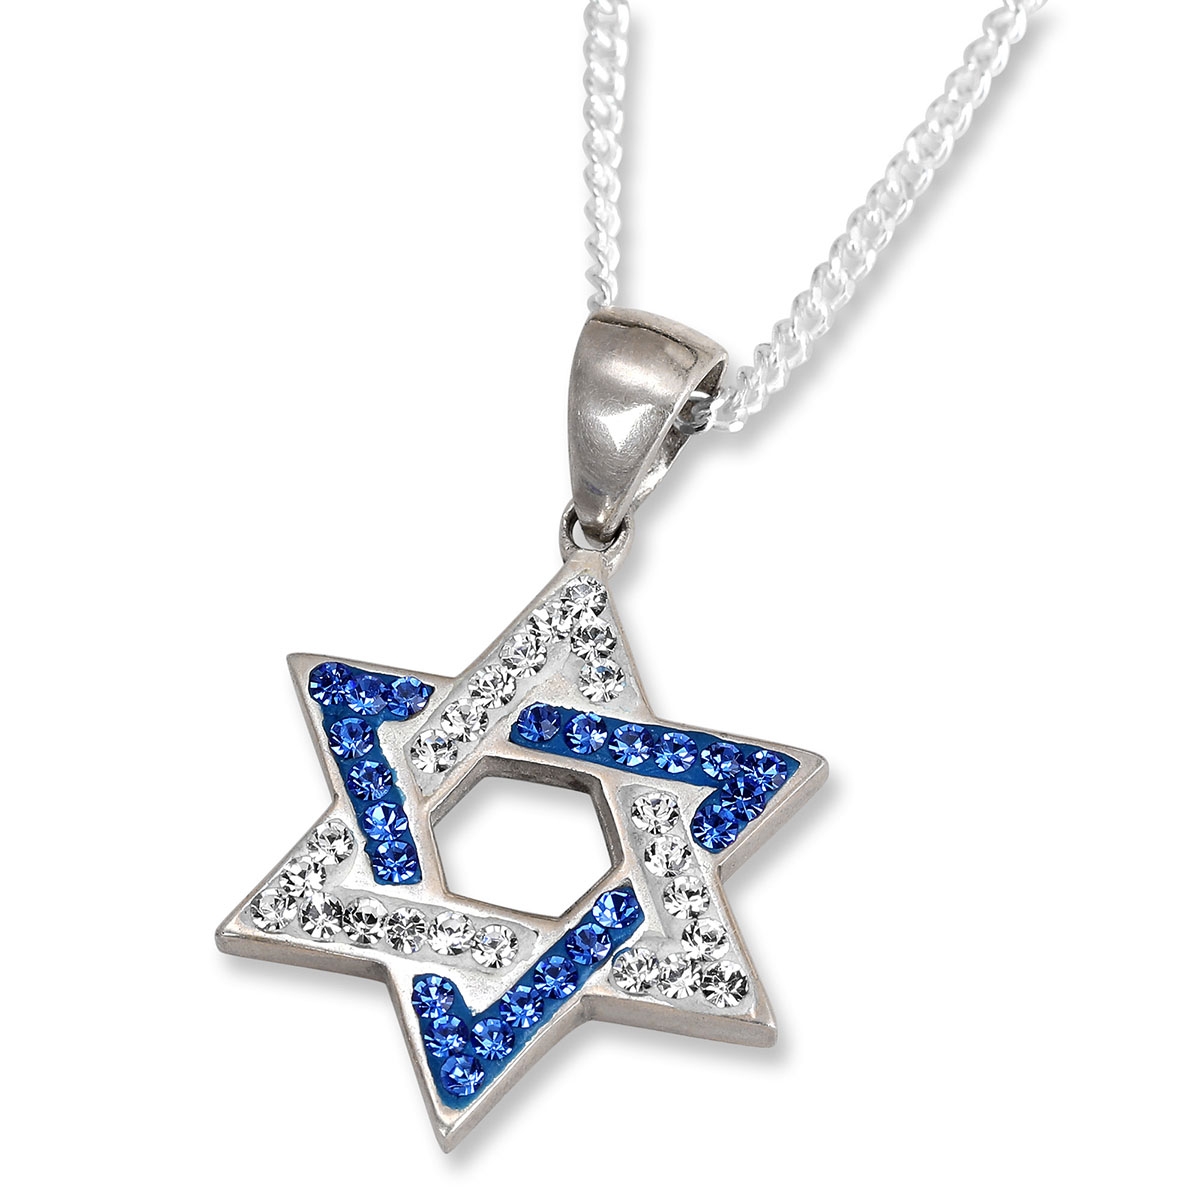 925 Sterling Silver Integrated Star of David Pendant Necklace with Zircon Stones - 1